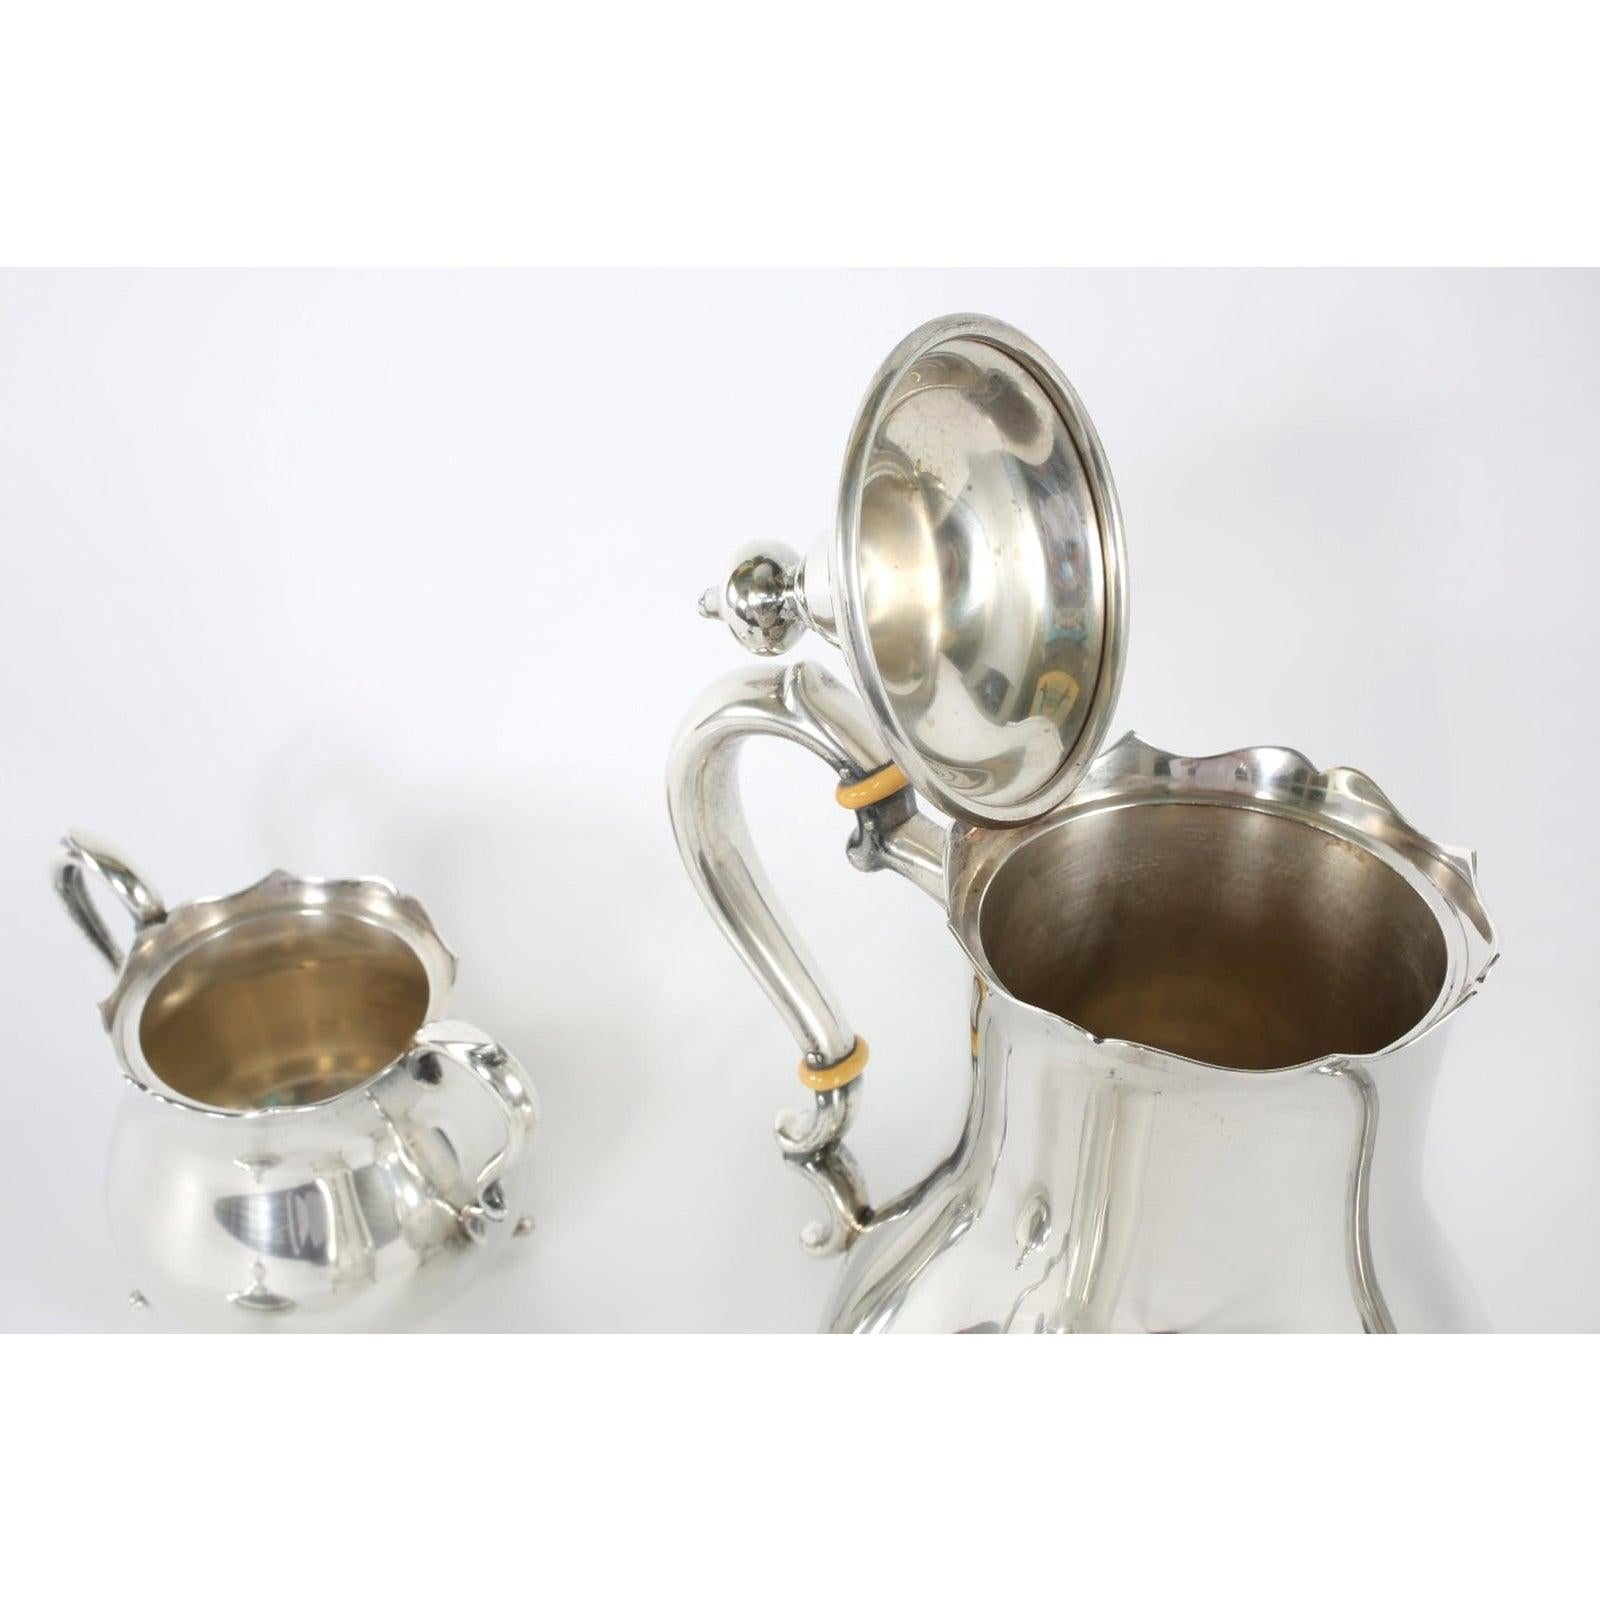 Cartier sterling silver tableware coffee / tea three piece service. The piece features a very clean line design with paw feet details. Each piece is in great vintage condition with minor wear consistent with age / use. Maker's mark undersigned. Tea